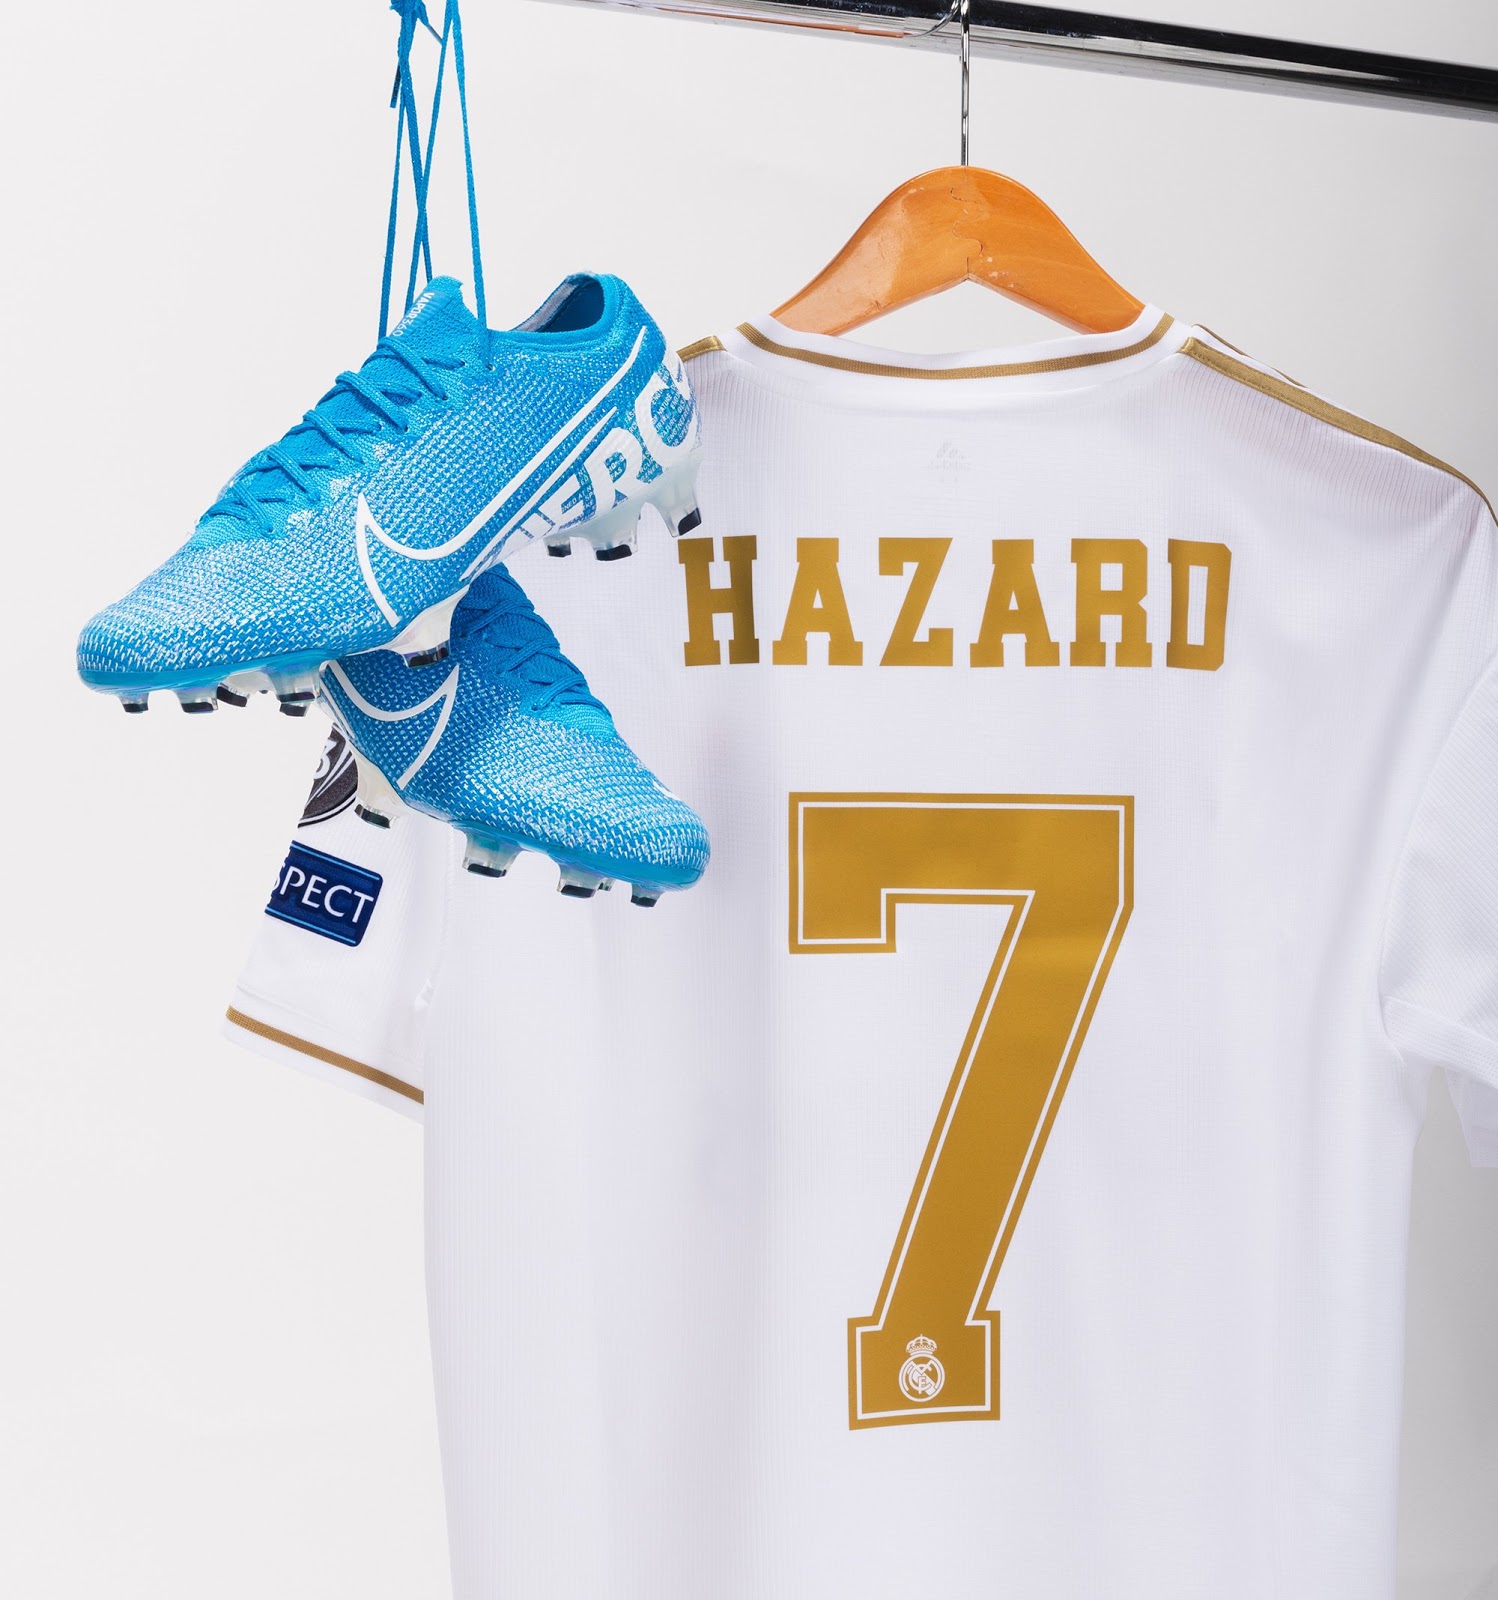 hazard new jersey number at real madrid